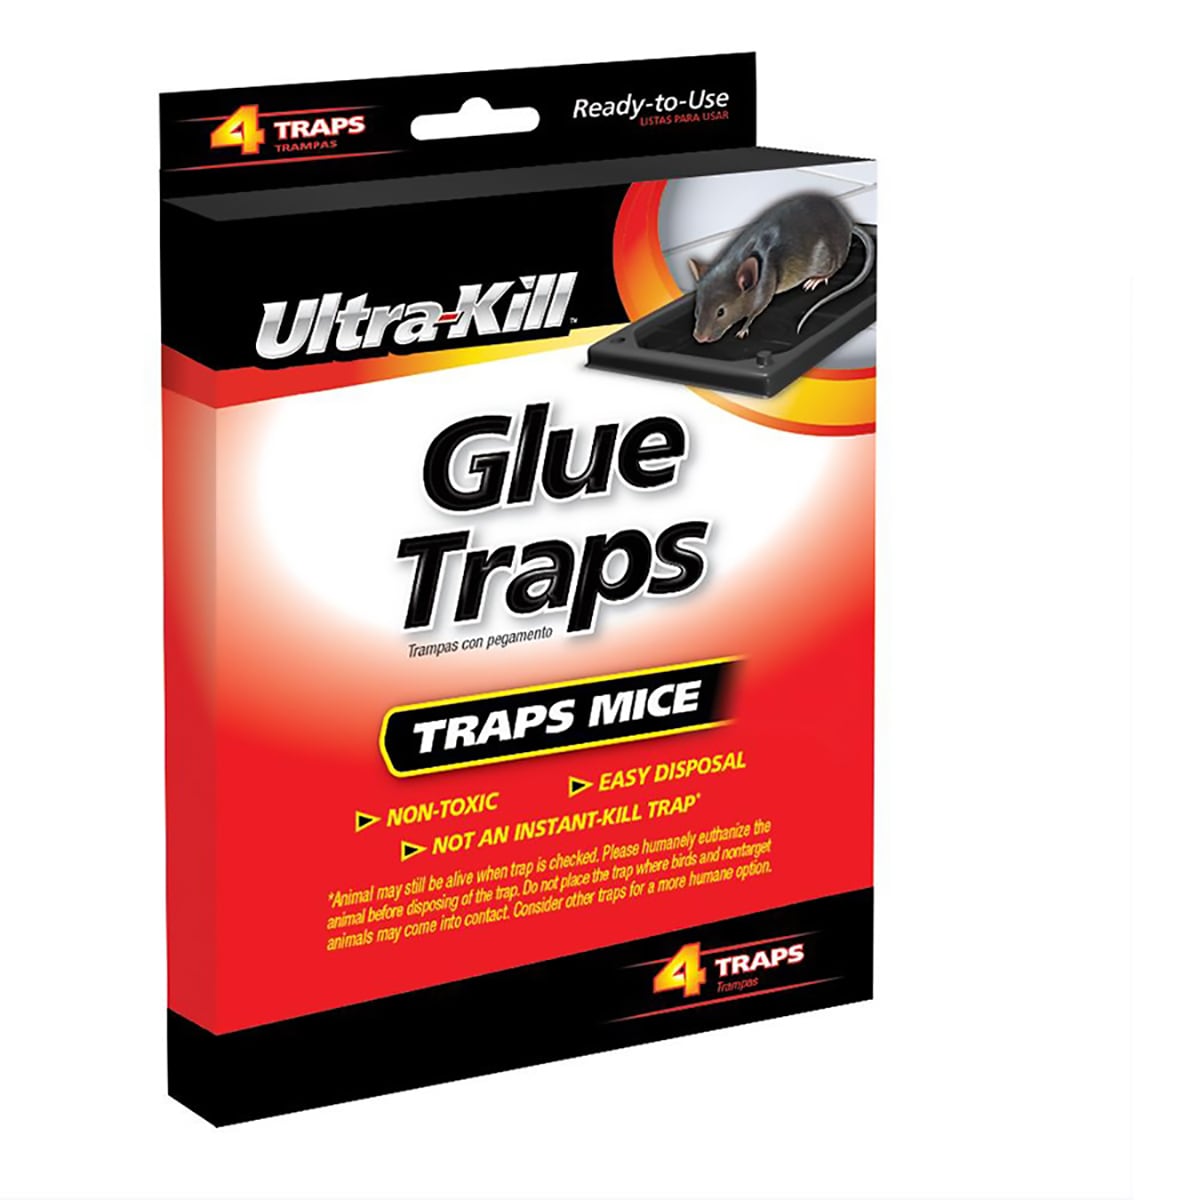  Mouse Traps, Mouse Traps Indoor, Mouse Traps Indoor for Home, Glue  Traps for Mice and Rats, Trampas para Ratones, Mouse Glue Traps Indoor for  Home, 6 Mice Traps 6 Glue